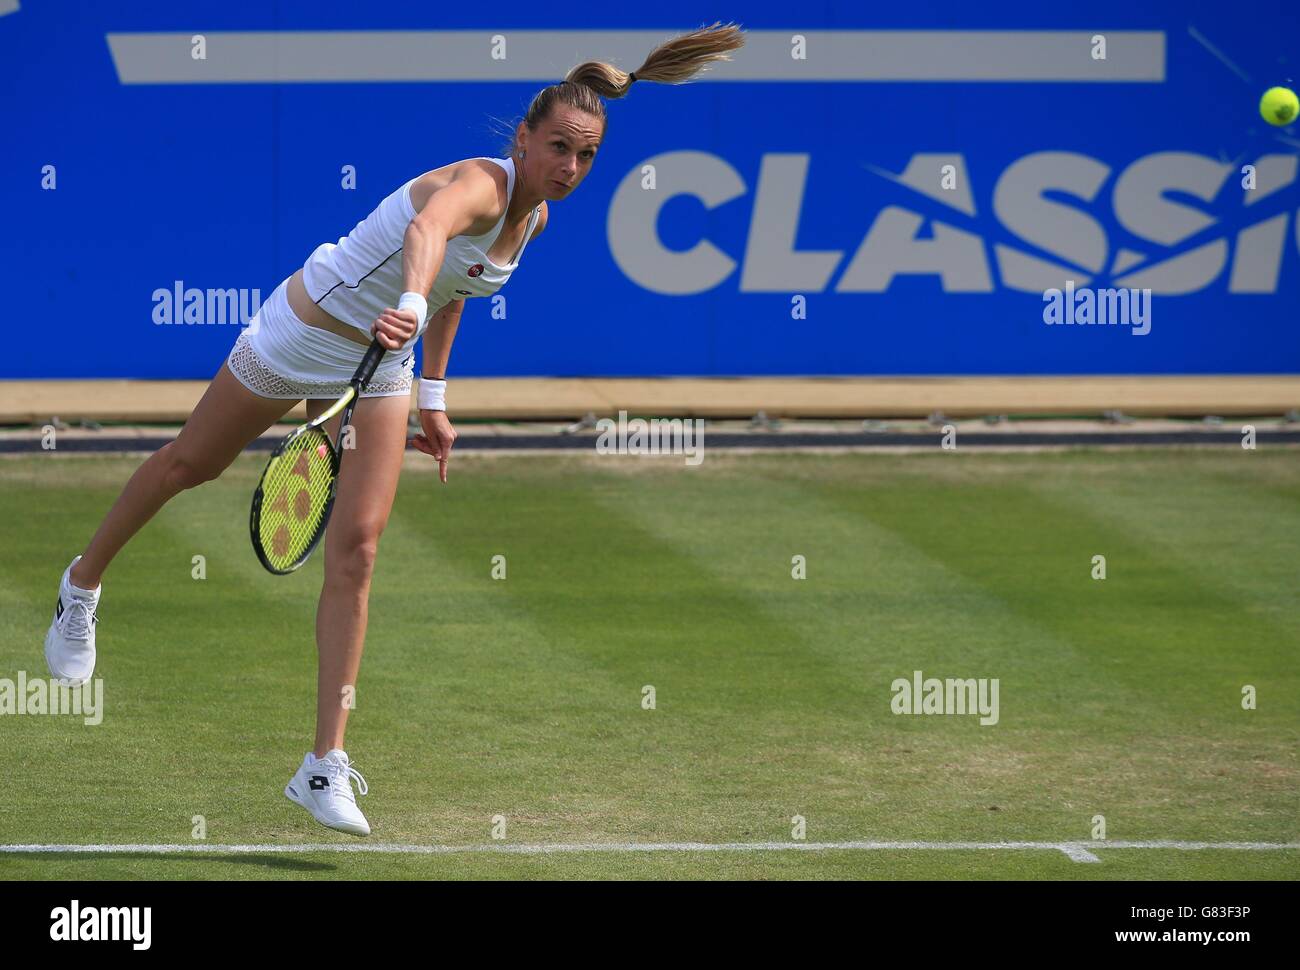 Slovakia's Magdalena Rybarikova during her match against Germany's Sabine Lisicki during day four of the the AEGON Classic at Edgbaston Priory, Birmingham. Stock Photo